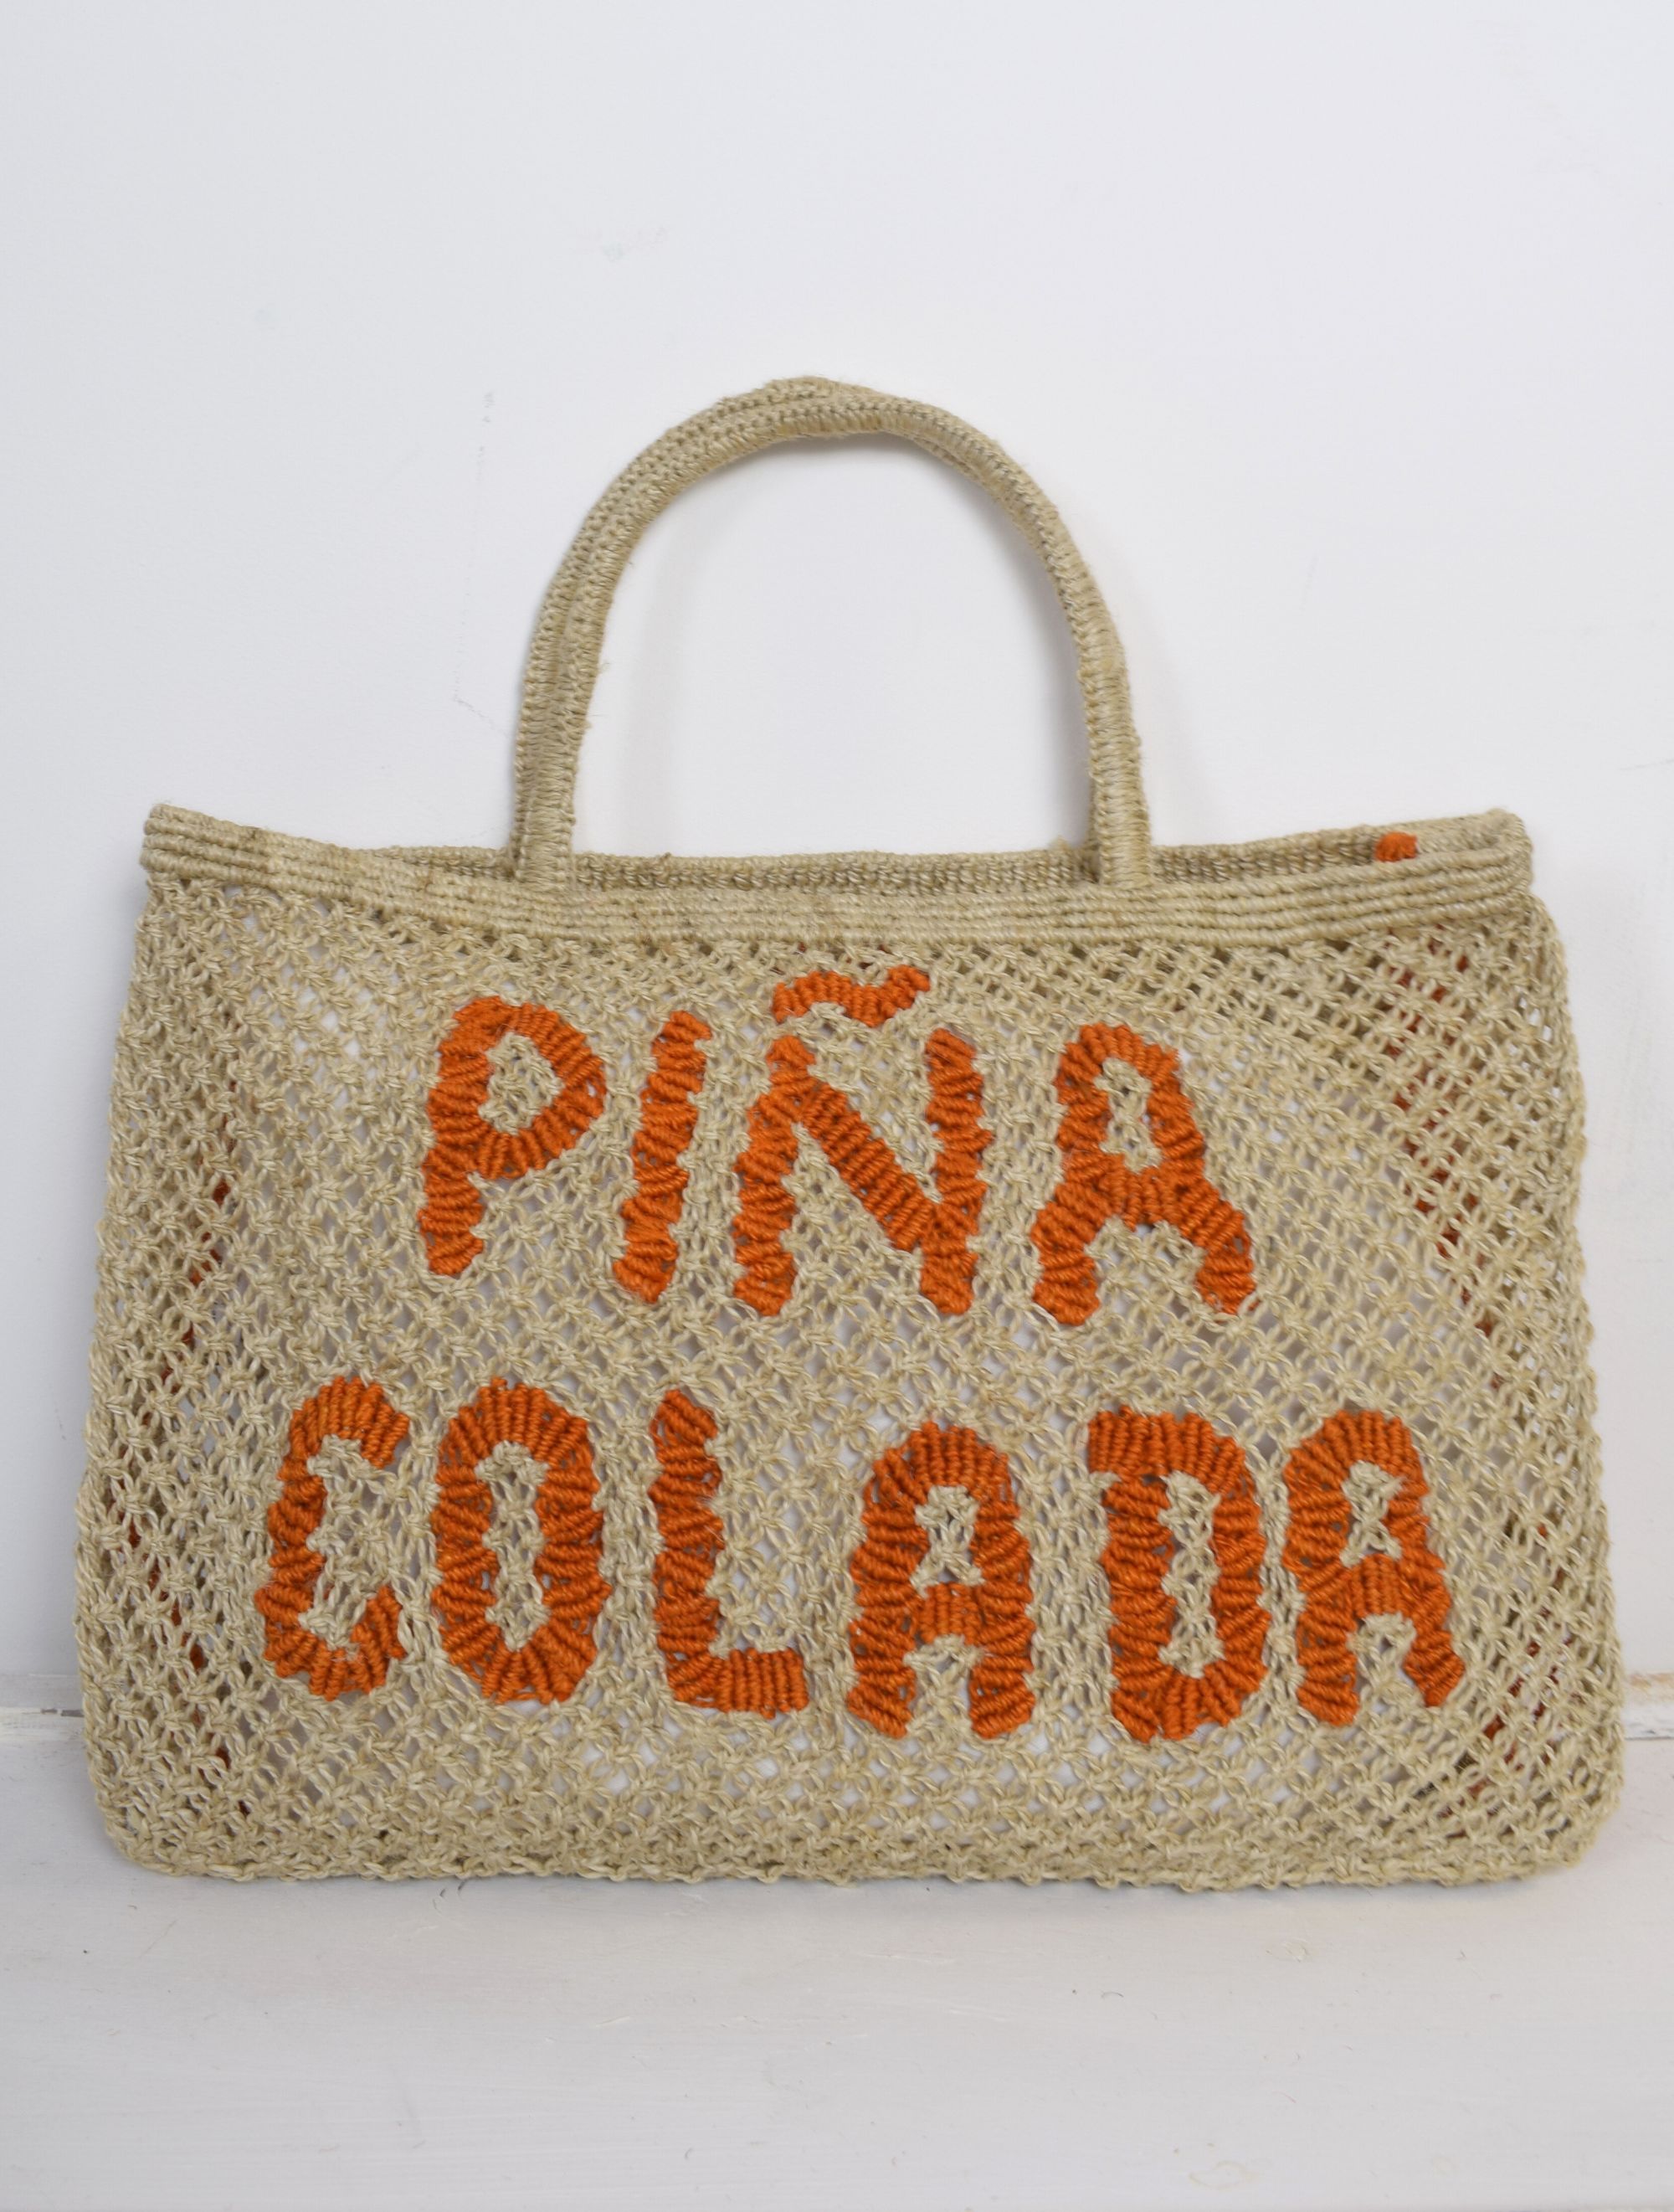 Woven nautral bag with pina colada writen on it in orange 